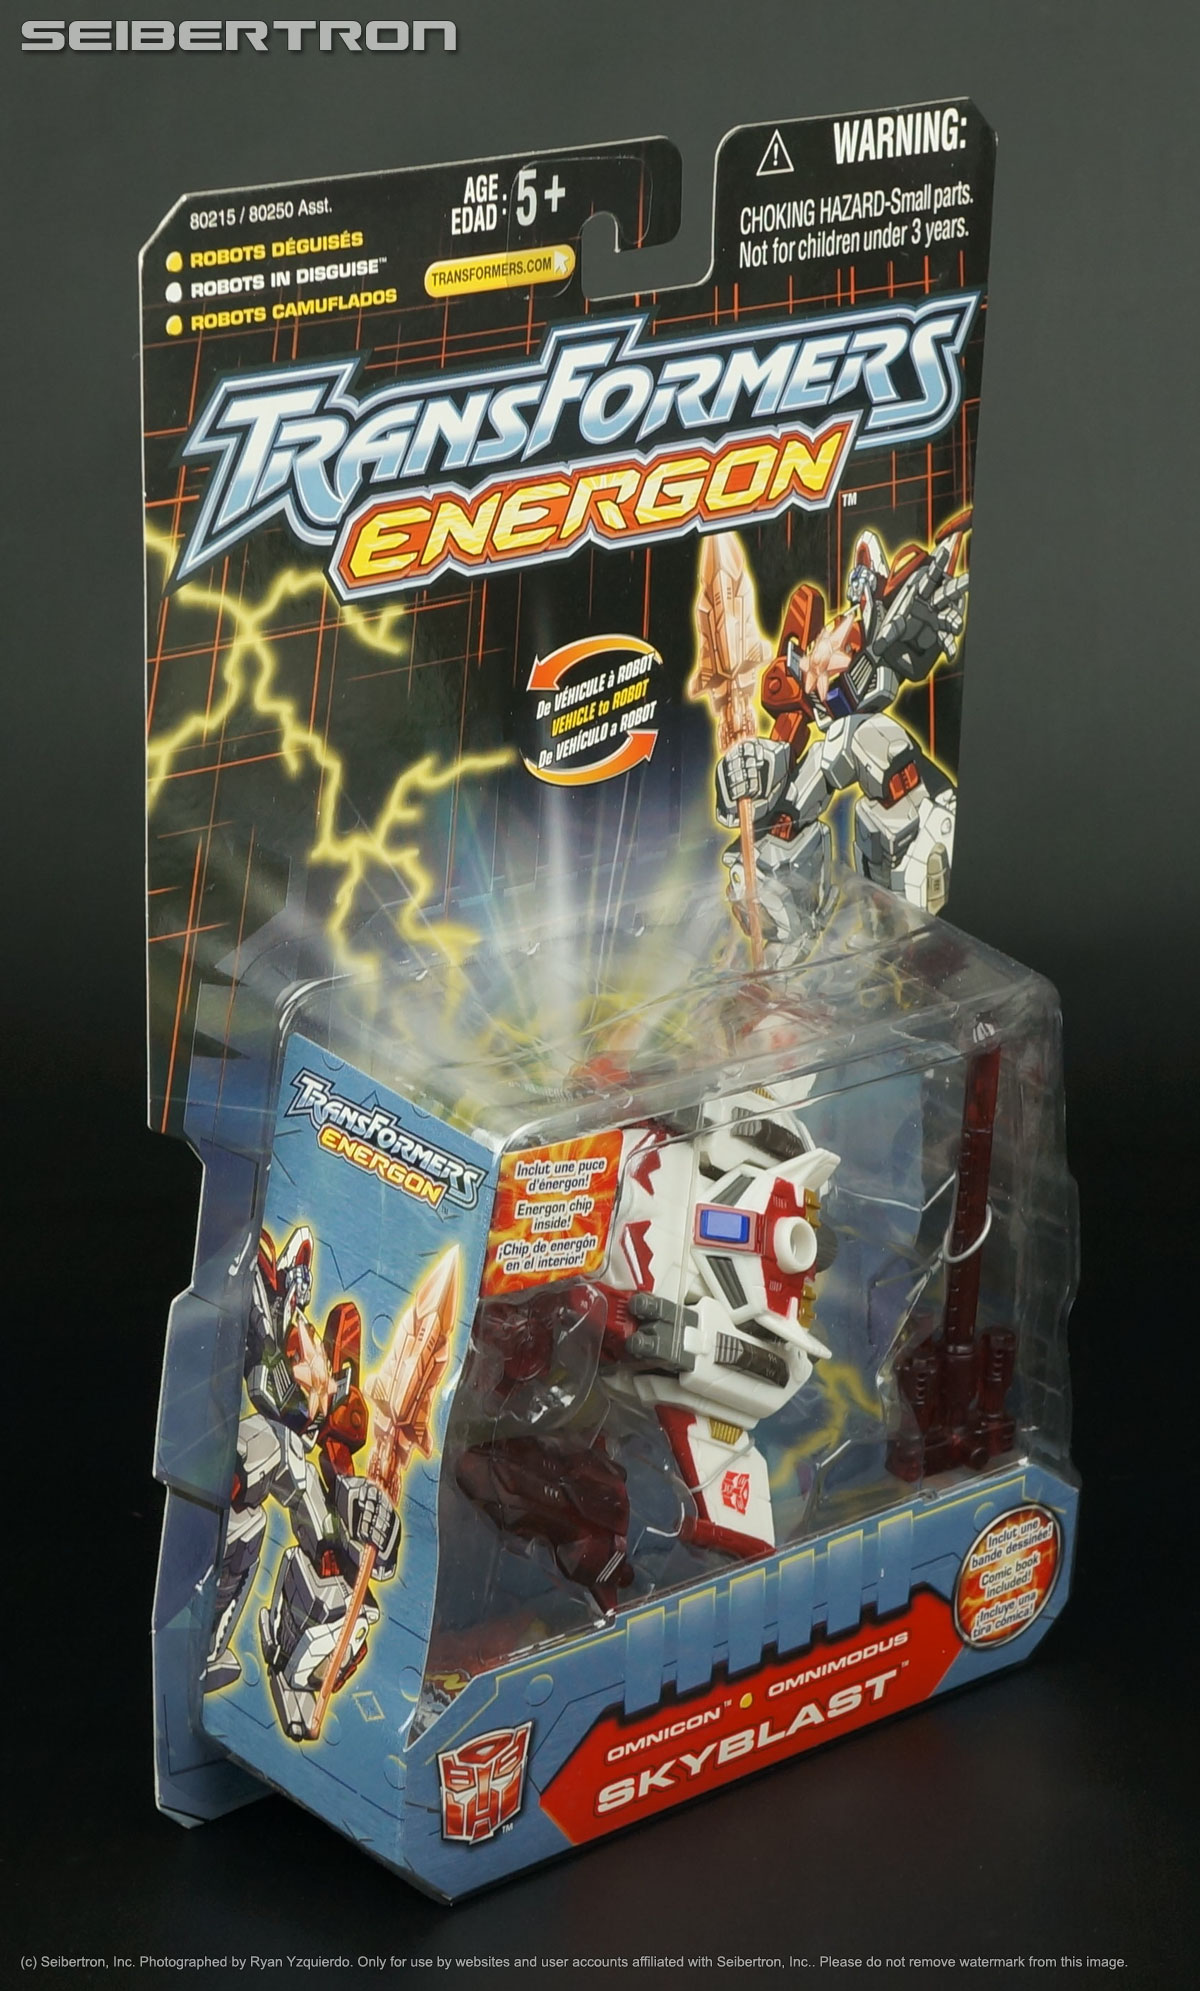 Transformers, Masters of the Universe, Teenage Mutant Ninja Turtles, Comic Books, and more! listings from Seibertron.com: SKYBLAST Transformers Energon Basic Scout Hasbro 2004 New